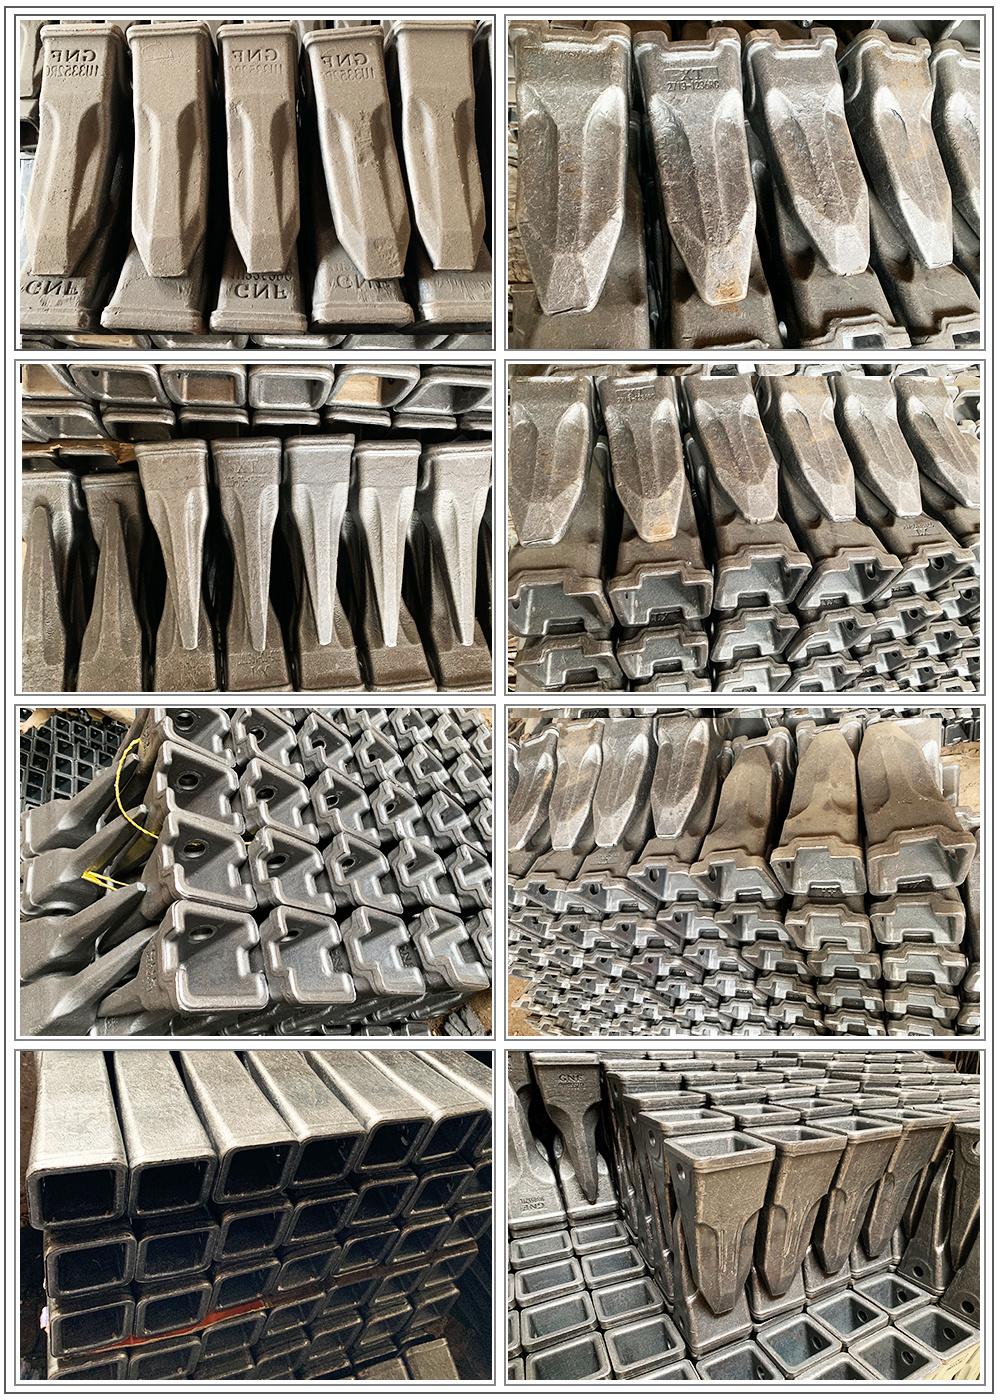 Cat 320 1u3352RC Top Supplier in China Alloy Steel Forged Excavator Bucket Teeth for Hyundai